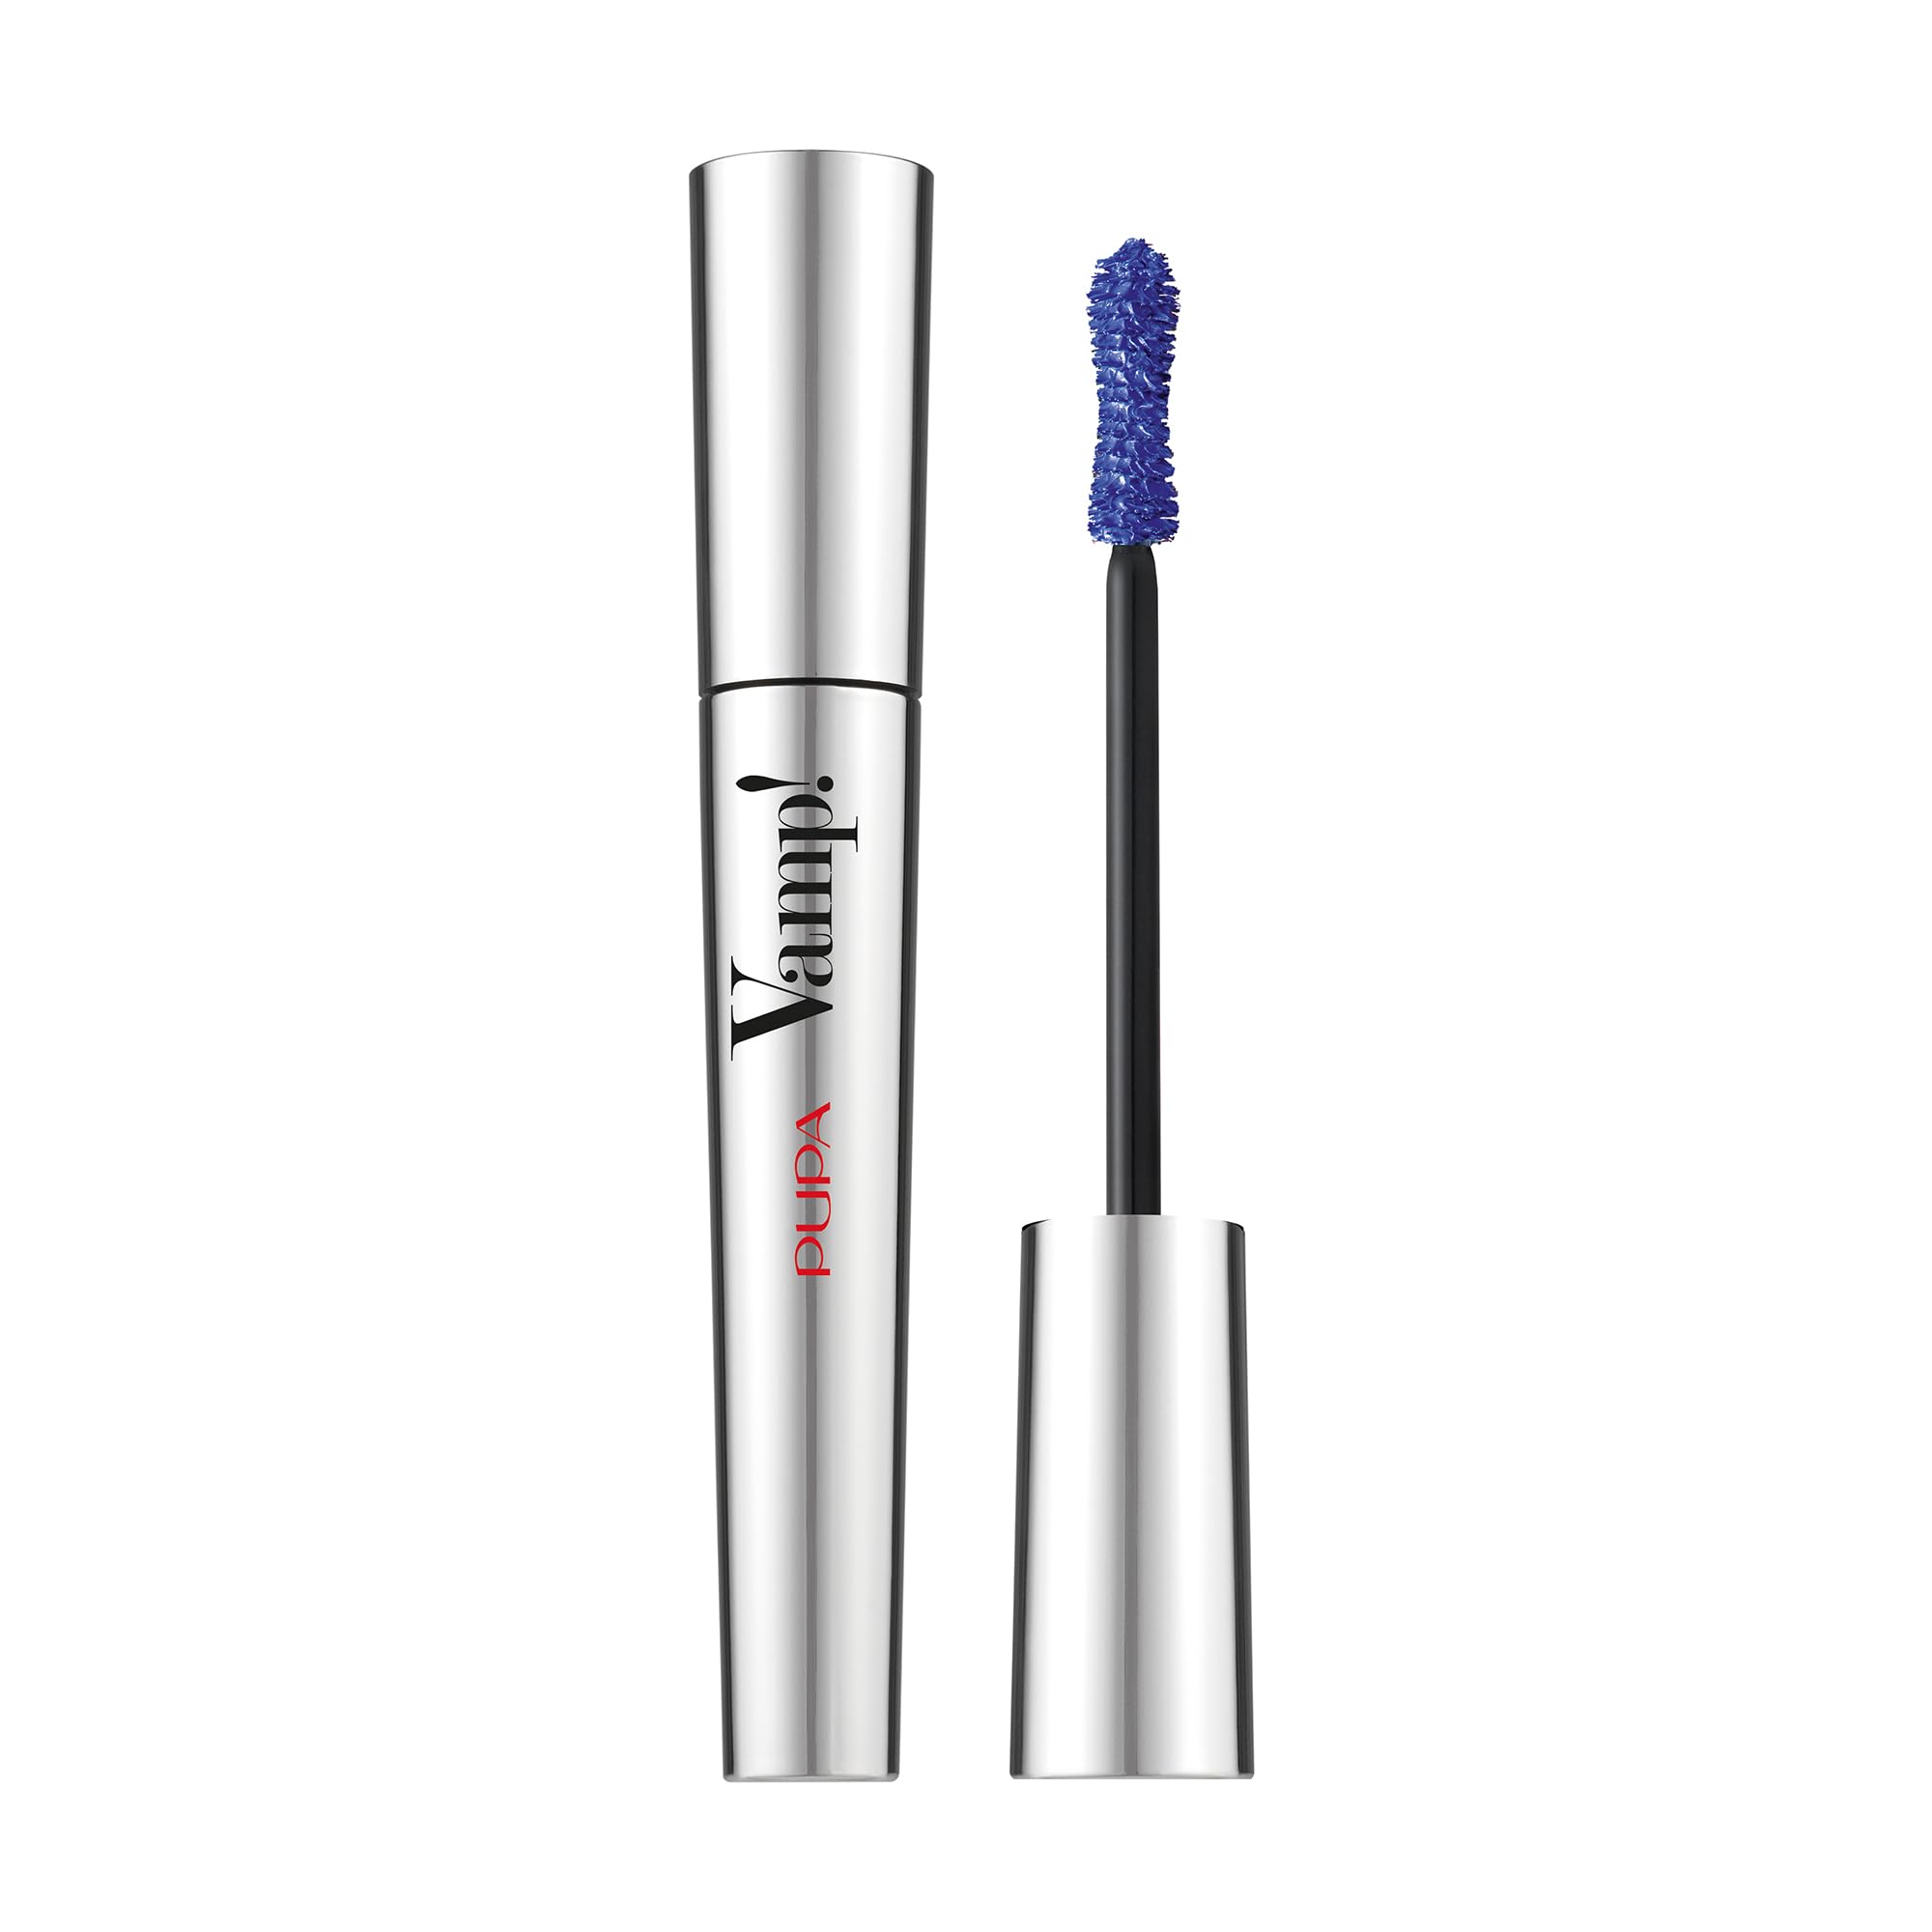 PUPA Milano Vamp! Mascara - For Voluminous And Dramatic Eyelashes - Max Lengthening And Defining Formula Adds Impact - Boost Your Eye Allure With Long, Thick Lashes - 301 Electric Blue - 0.32 Oz